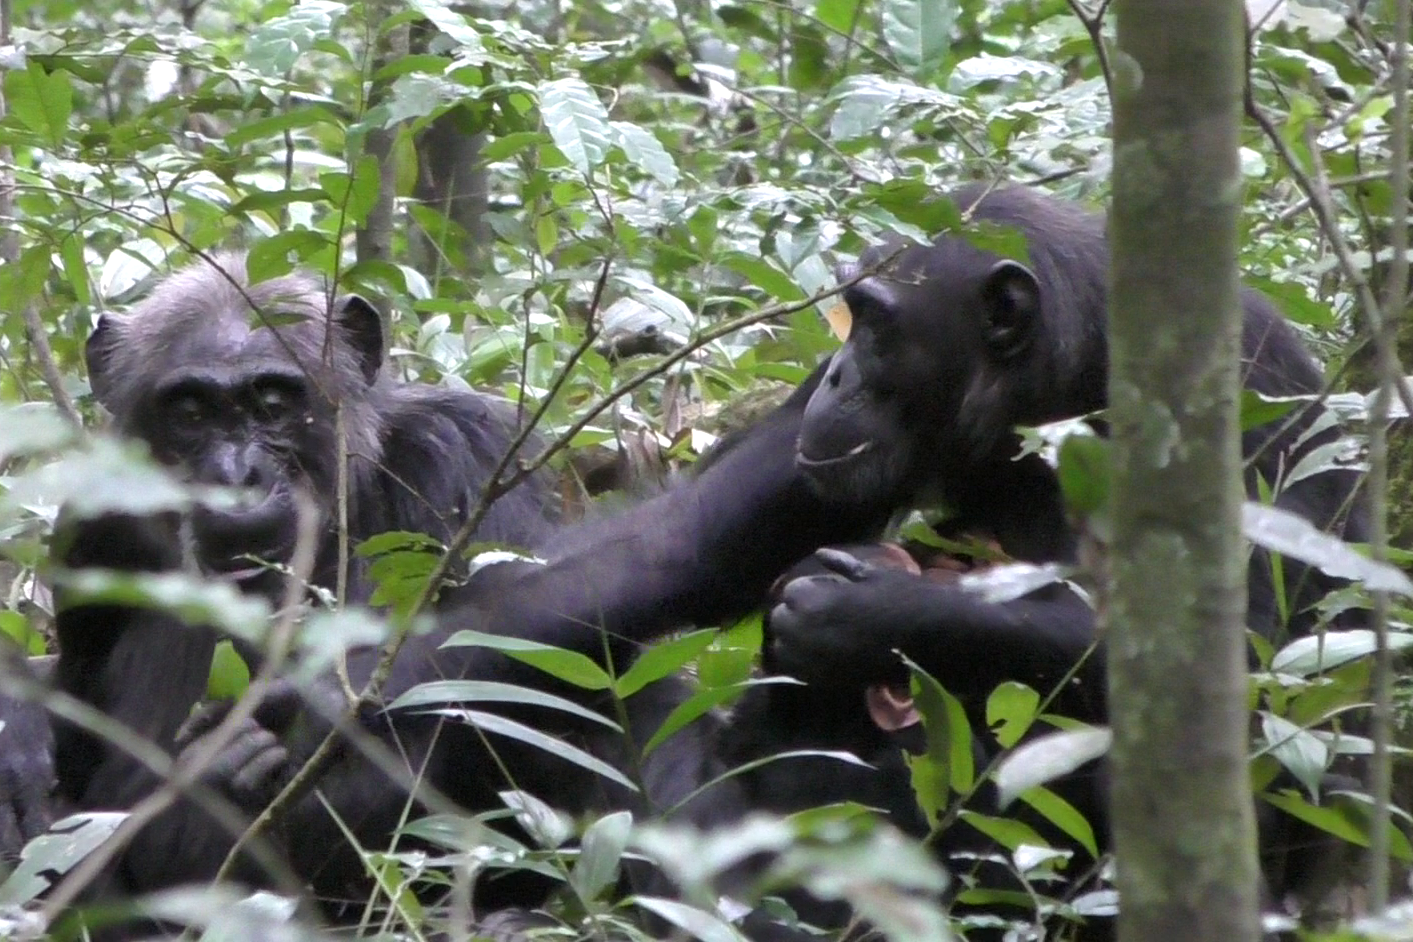 Wild chimpanzees show others objects simply to share attention (Claudia Wilke/University of York)